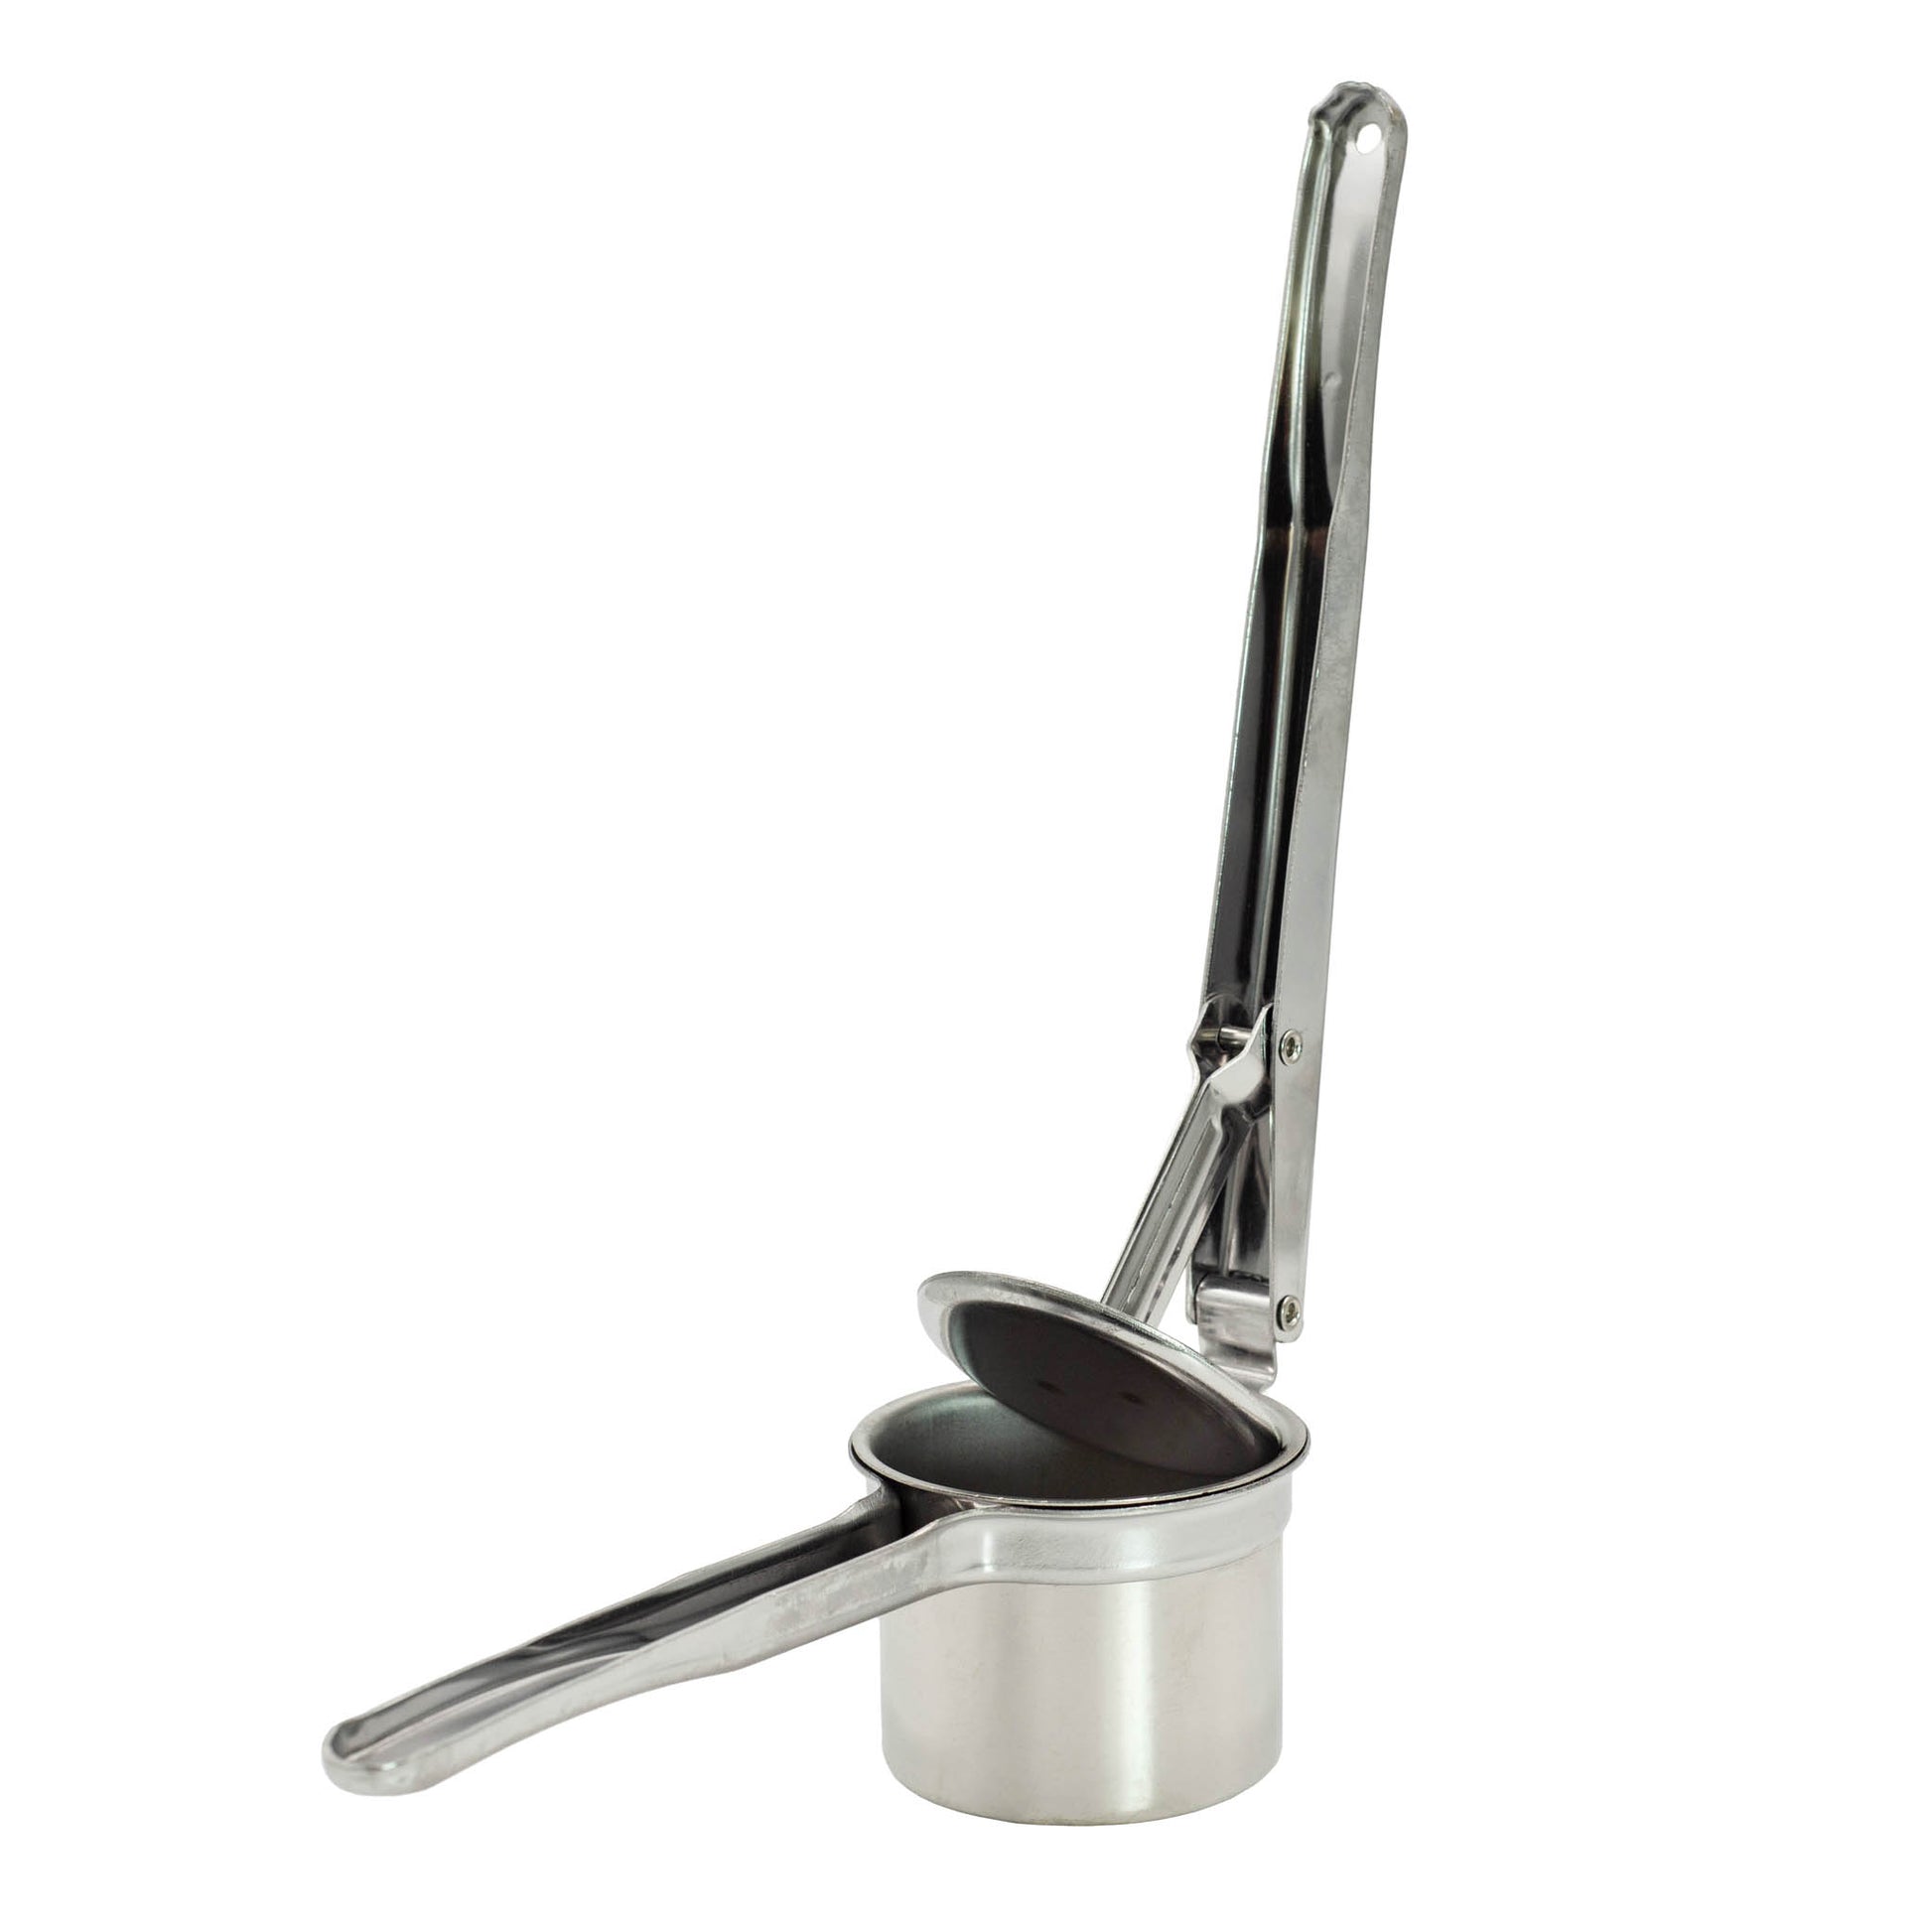 Italian made stainless steel potato ricer and masher. 